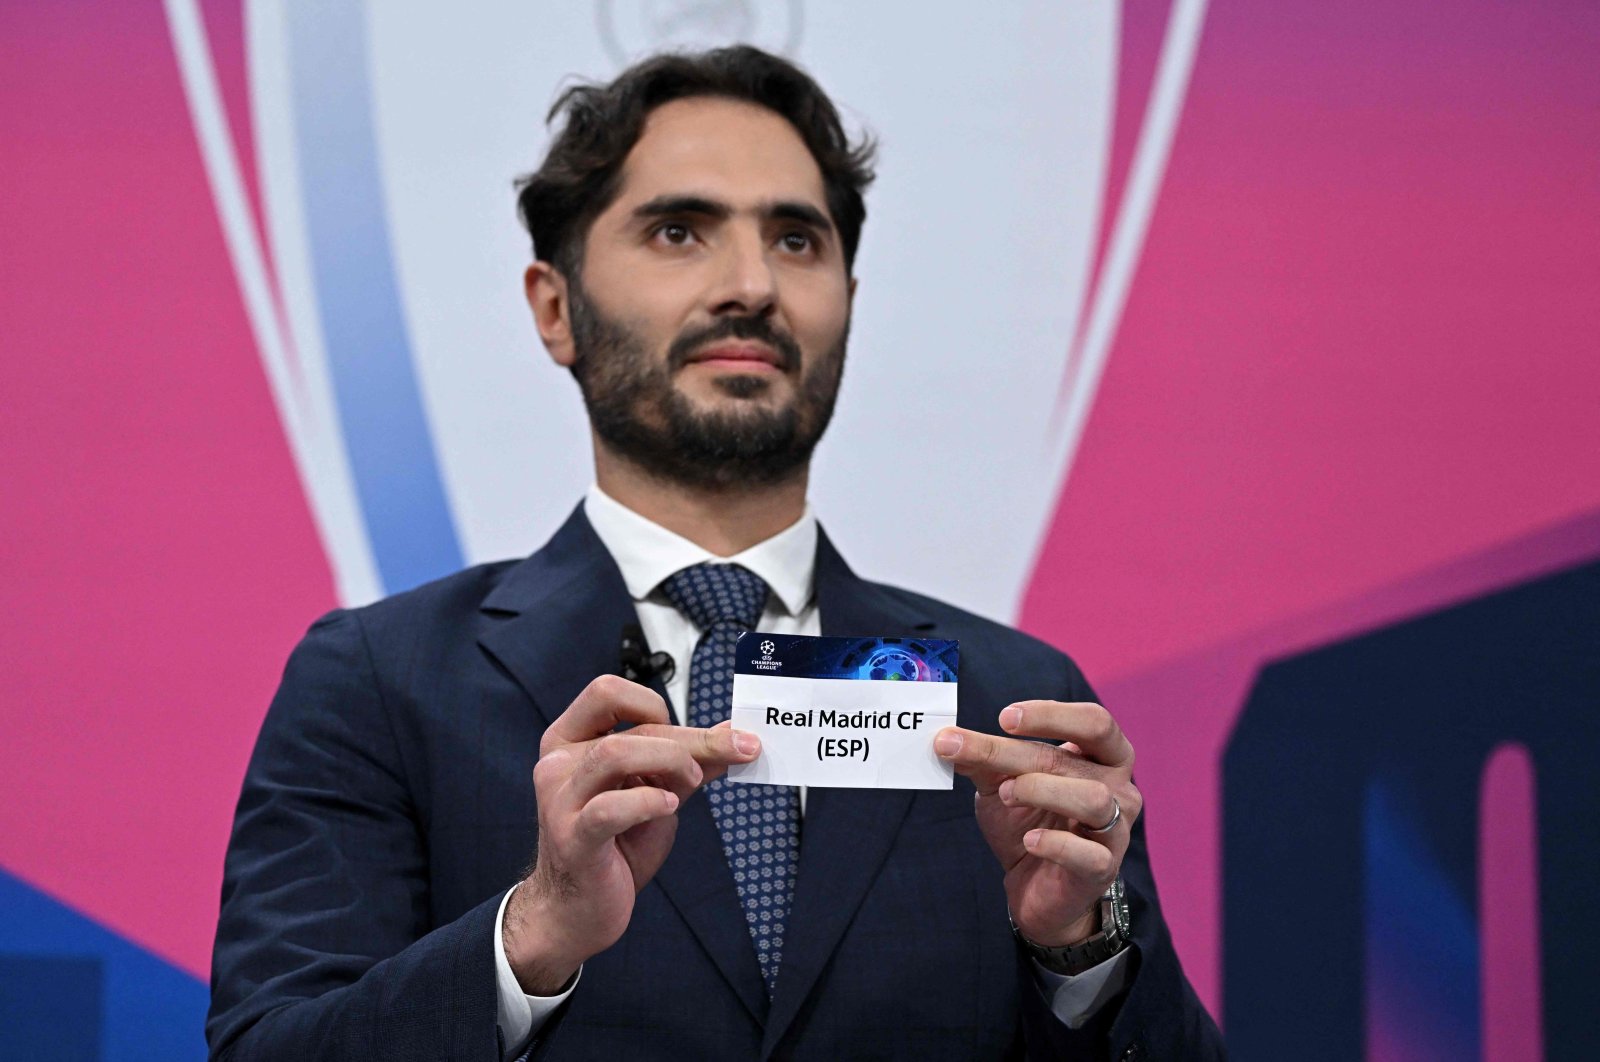 UEFA Champions League final ambassador Turkish former footballer Hamit Altintop displays the paper slip of Real Madrid CF (ESP) during the draw for the quarterfinal, Nyon, March 17, 2023. (AFP Photo)